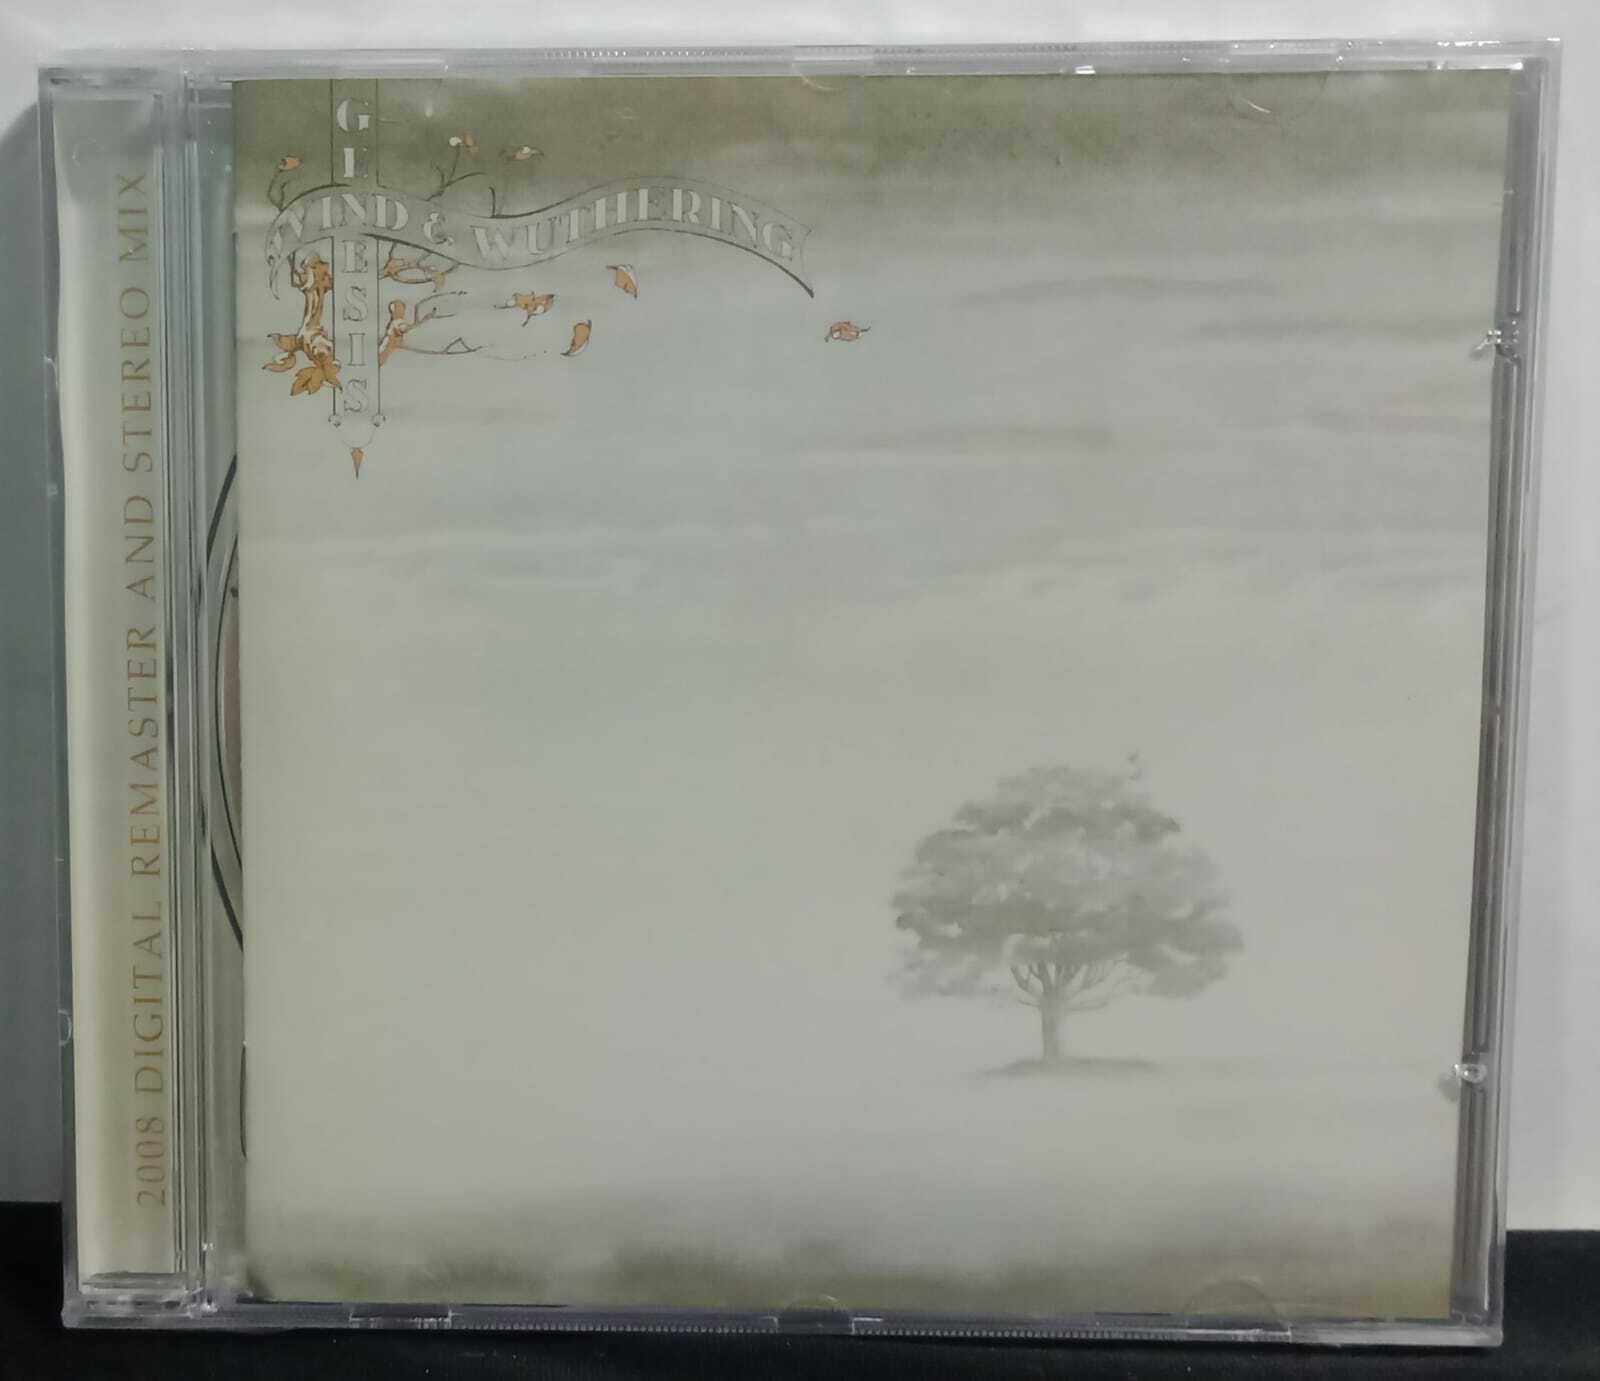 CD - Genesis - Wind and Wuthering (Imp/Lacrado)